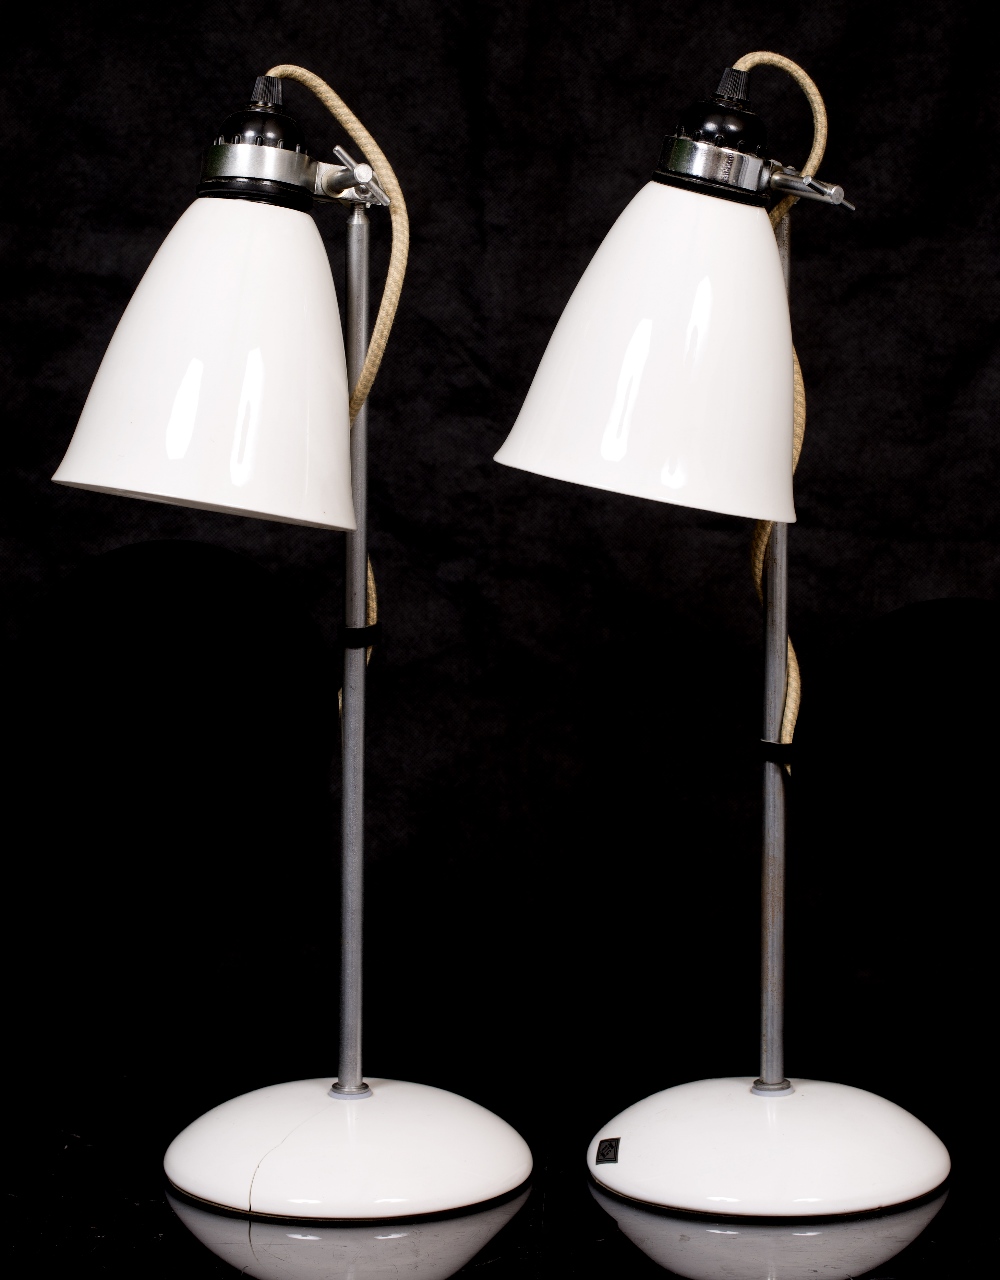 A PAIR OF BTC HECTOR DESK LAMPS in silvered steel and white porcelain, each 47cm high, one base